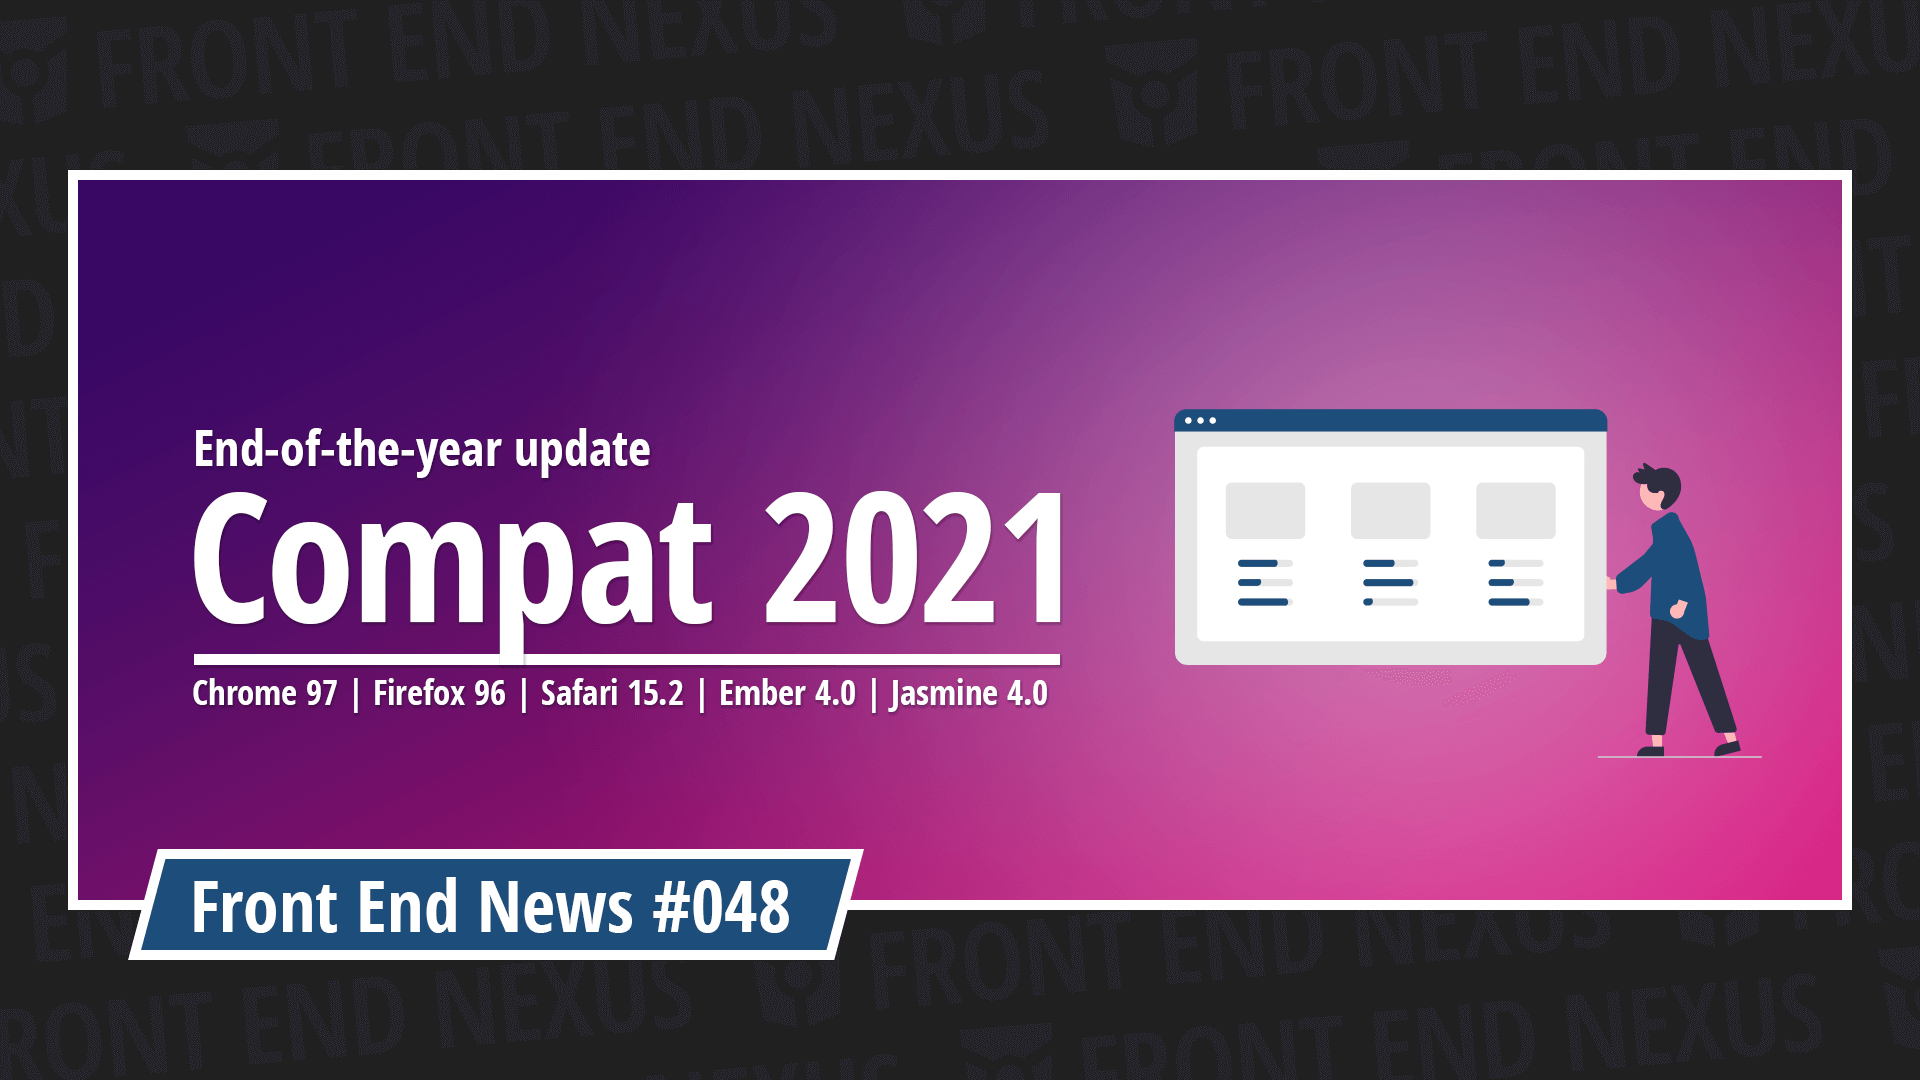 Compat 2021 Update, Chrome 97, Firefox 96, Safari 15.2, Ember 4.0, Jasmine 4.0, and more | Front End News #048